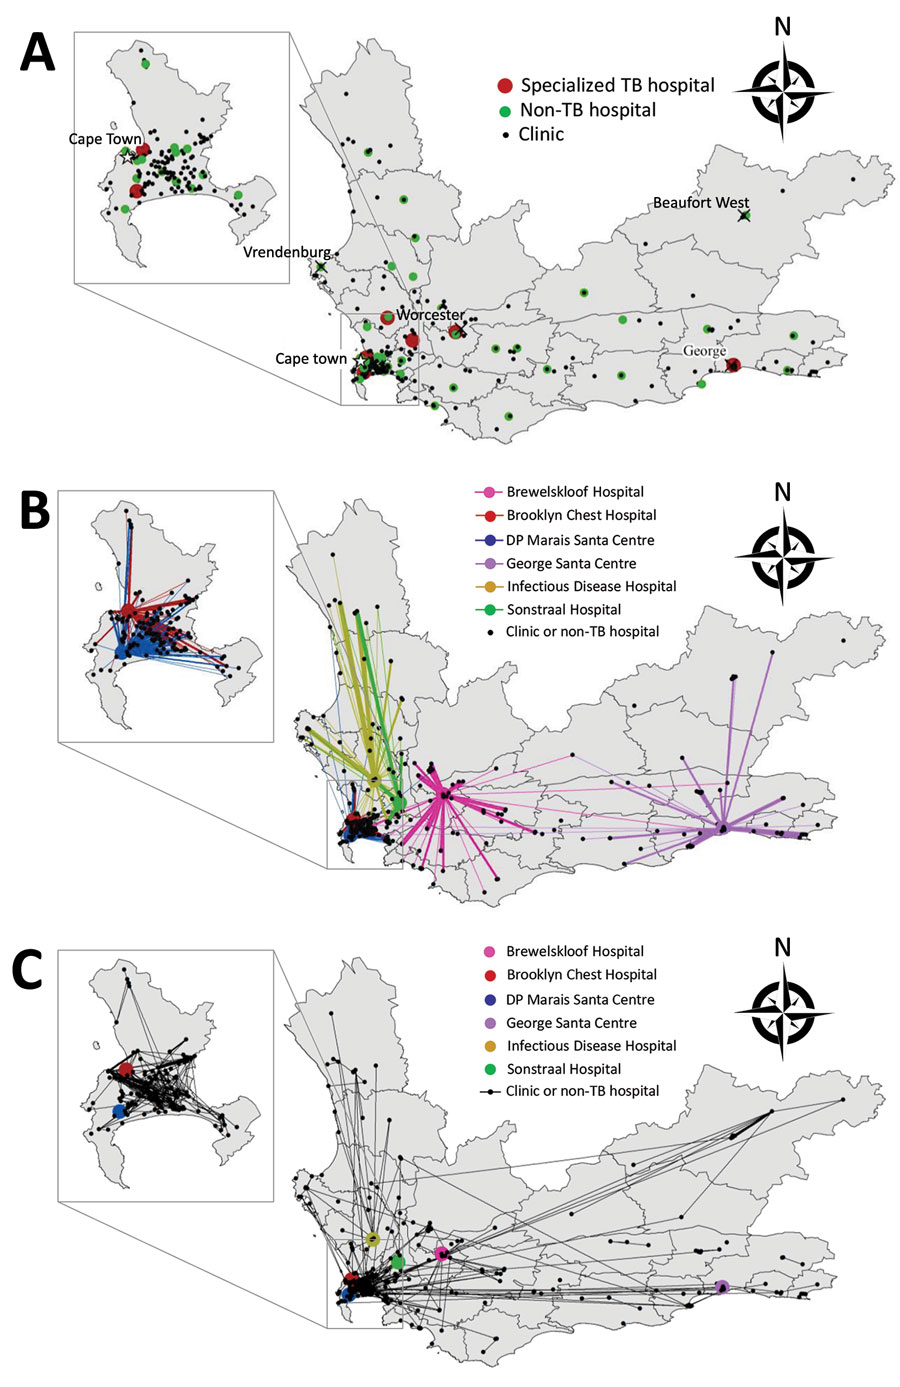 Healthcare facilities visited and movements between hospitals by patients in RR TB cohort, Western Cape Province, South Africa, 2012–2014. Inset maps show the Cape Town Metropole. A) All healthcare facilities visited <1 y after diagnosis. B) All movements made <1 y after diagnosis that involved TB hospitals. C) All movements made <1 y after diagnosis that did not involve a TB hospital. RR, rifampin-resistant; TB, tuberculosis.